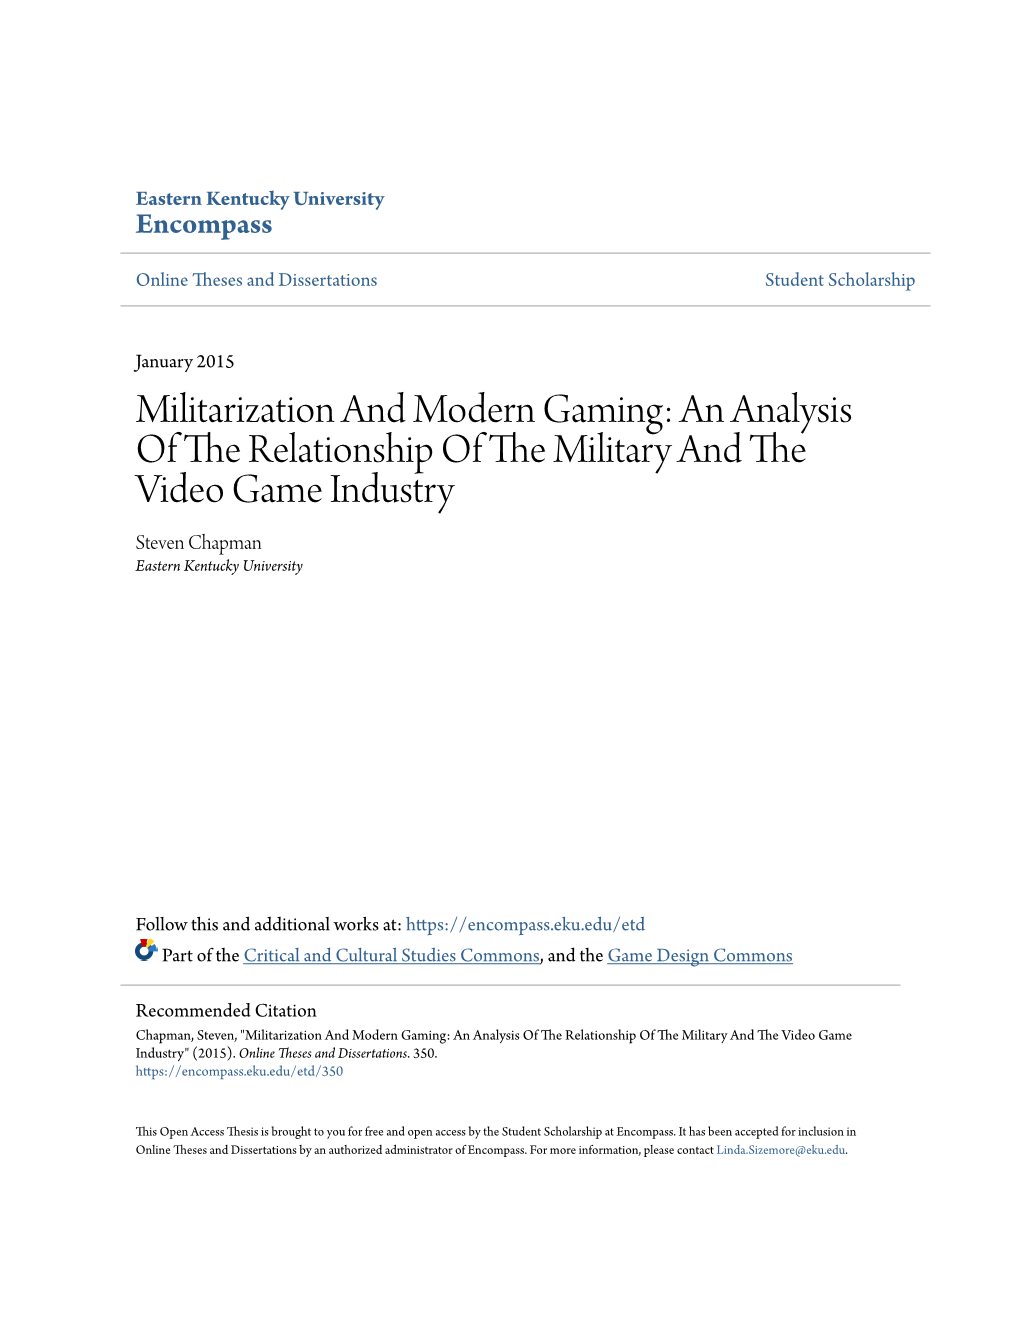 Militarization and Modern Gaming: an Analysis of the Relationship of the Im Litary and the Video Game Industry Steven Chapman Eastern Kentucky University